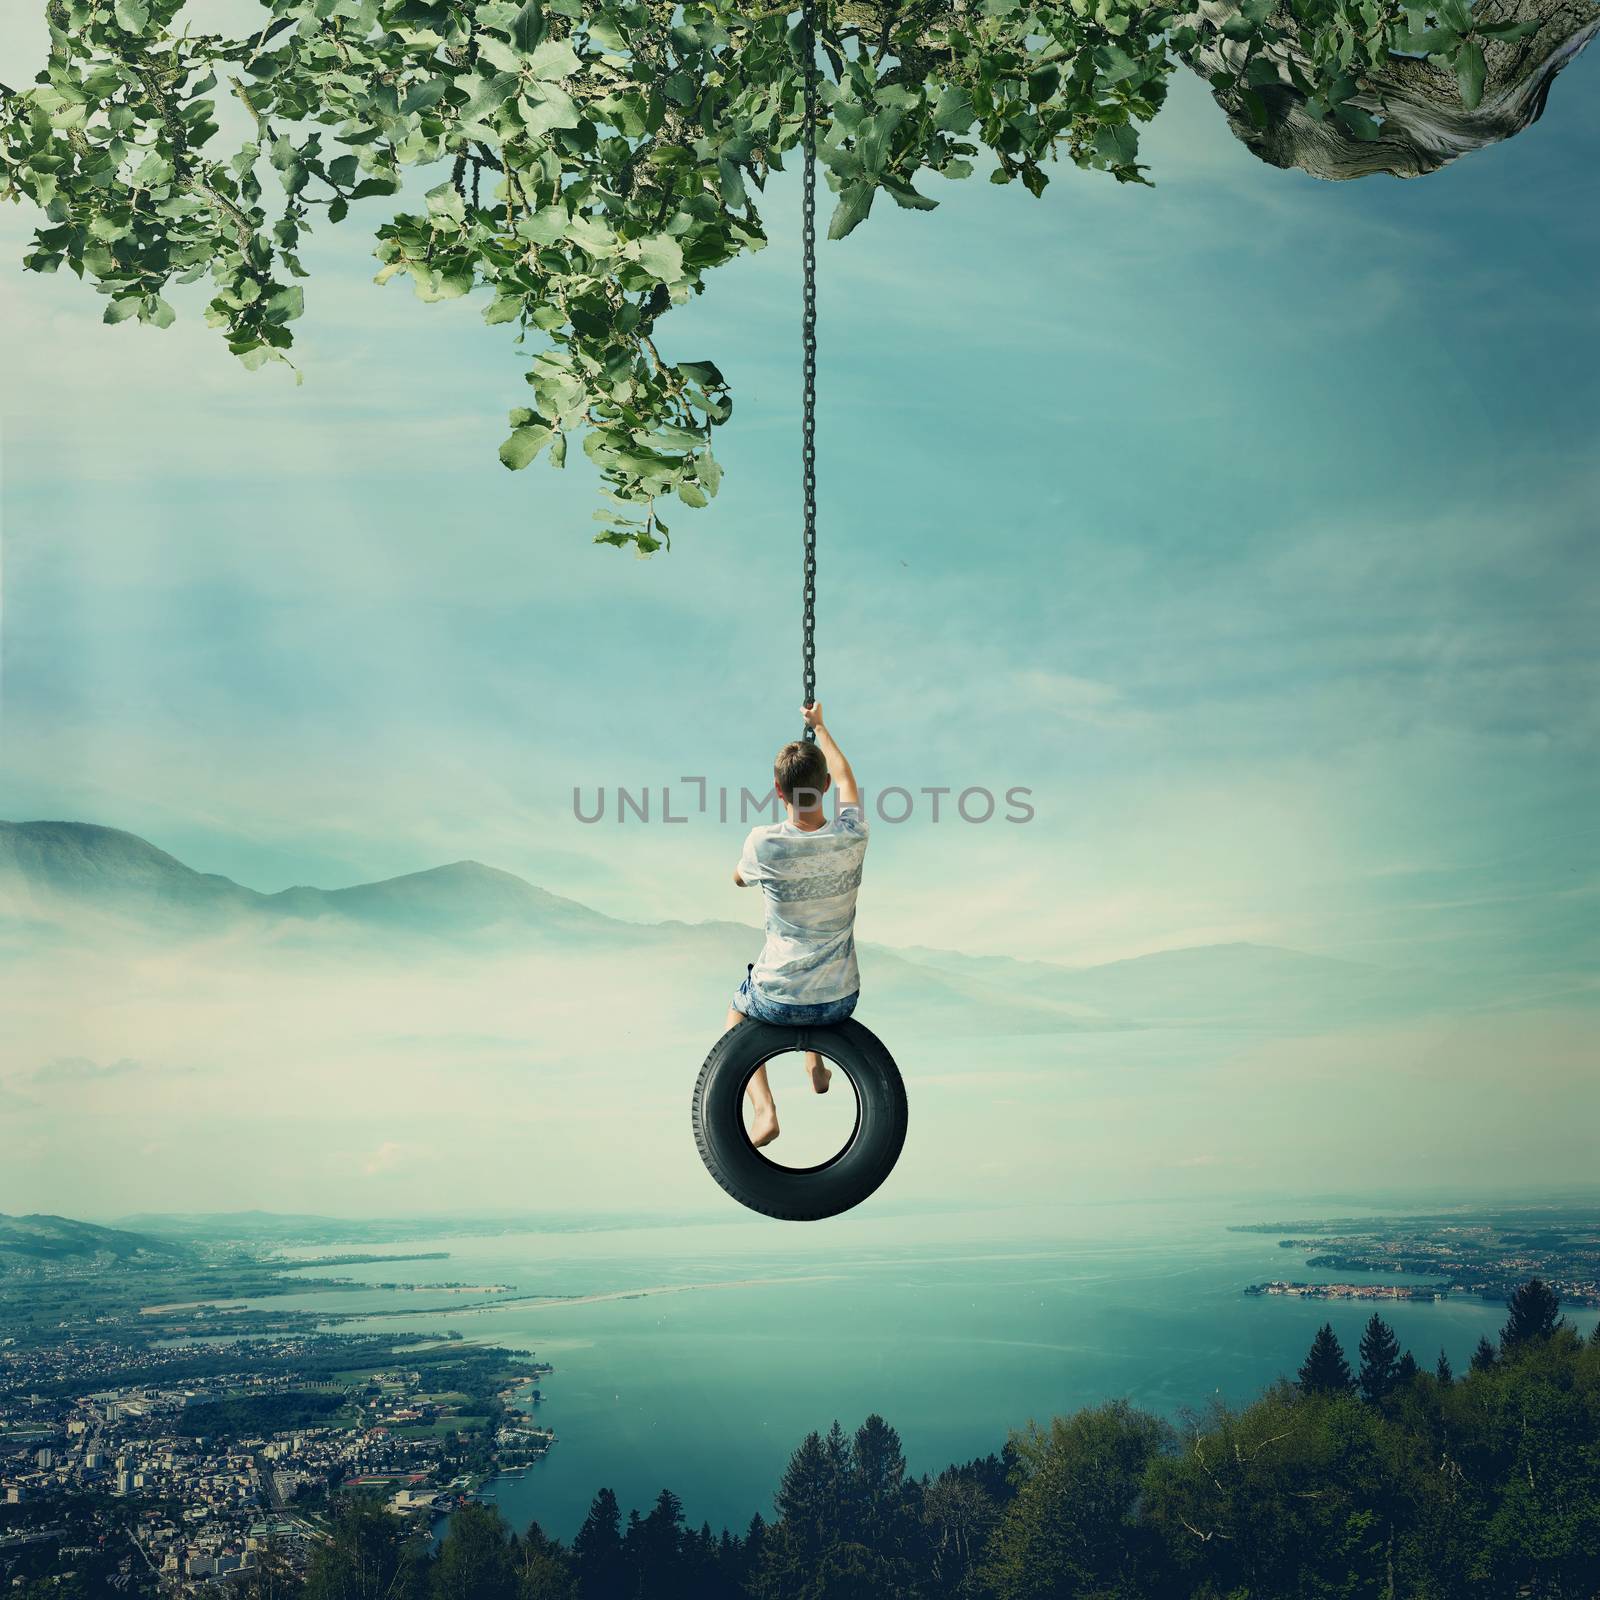 Young boy swinging on a tire over the foggy city with lake and forest background. Having fun and freedom concept